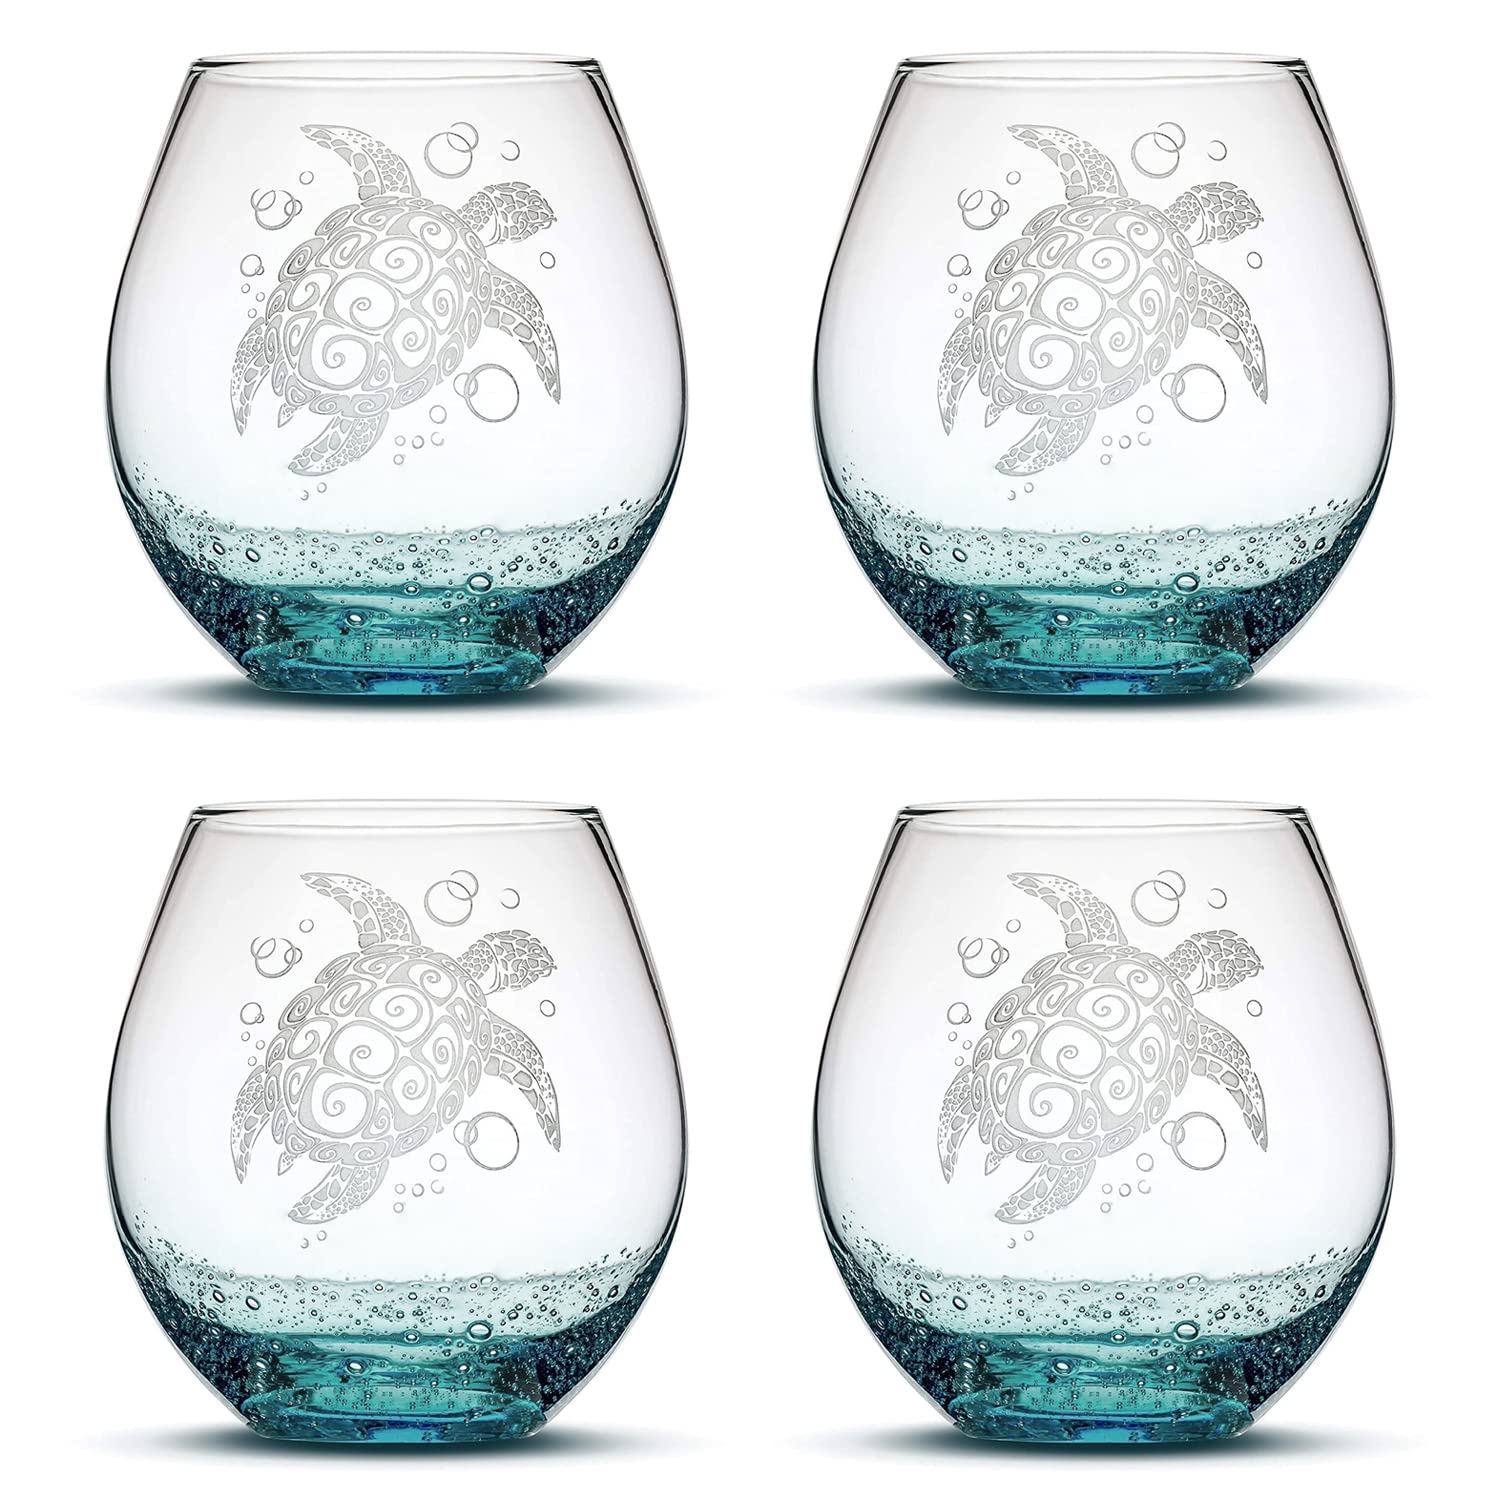 Integrity Bottles Tribal Sea Turtle Design, (Set of 4) Stemless Wine Glass, Handmade, Handblown, Hand Etched Gifts, Sand Carved, 18oz (Bubbly Teal)